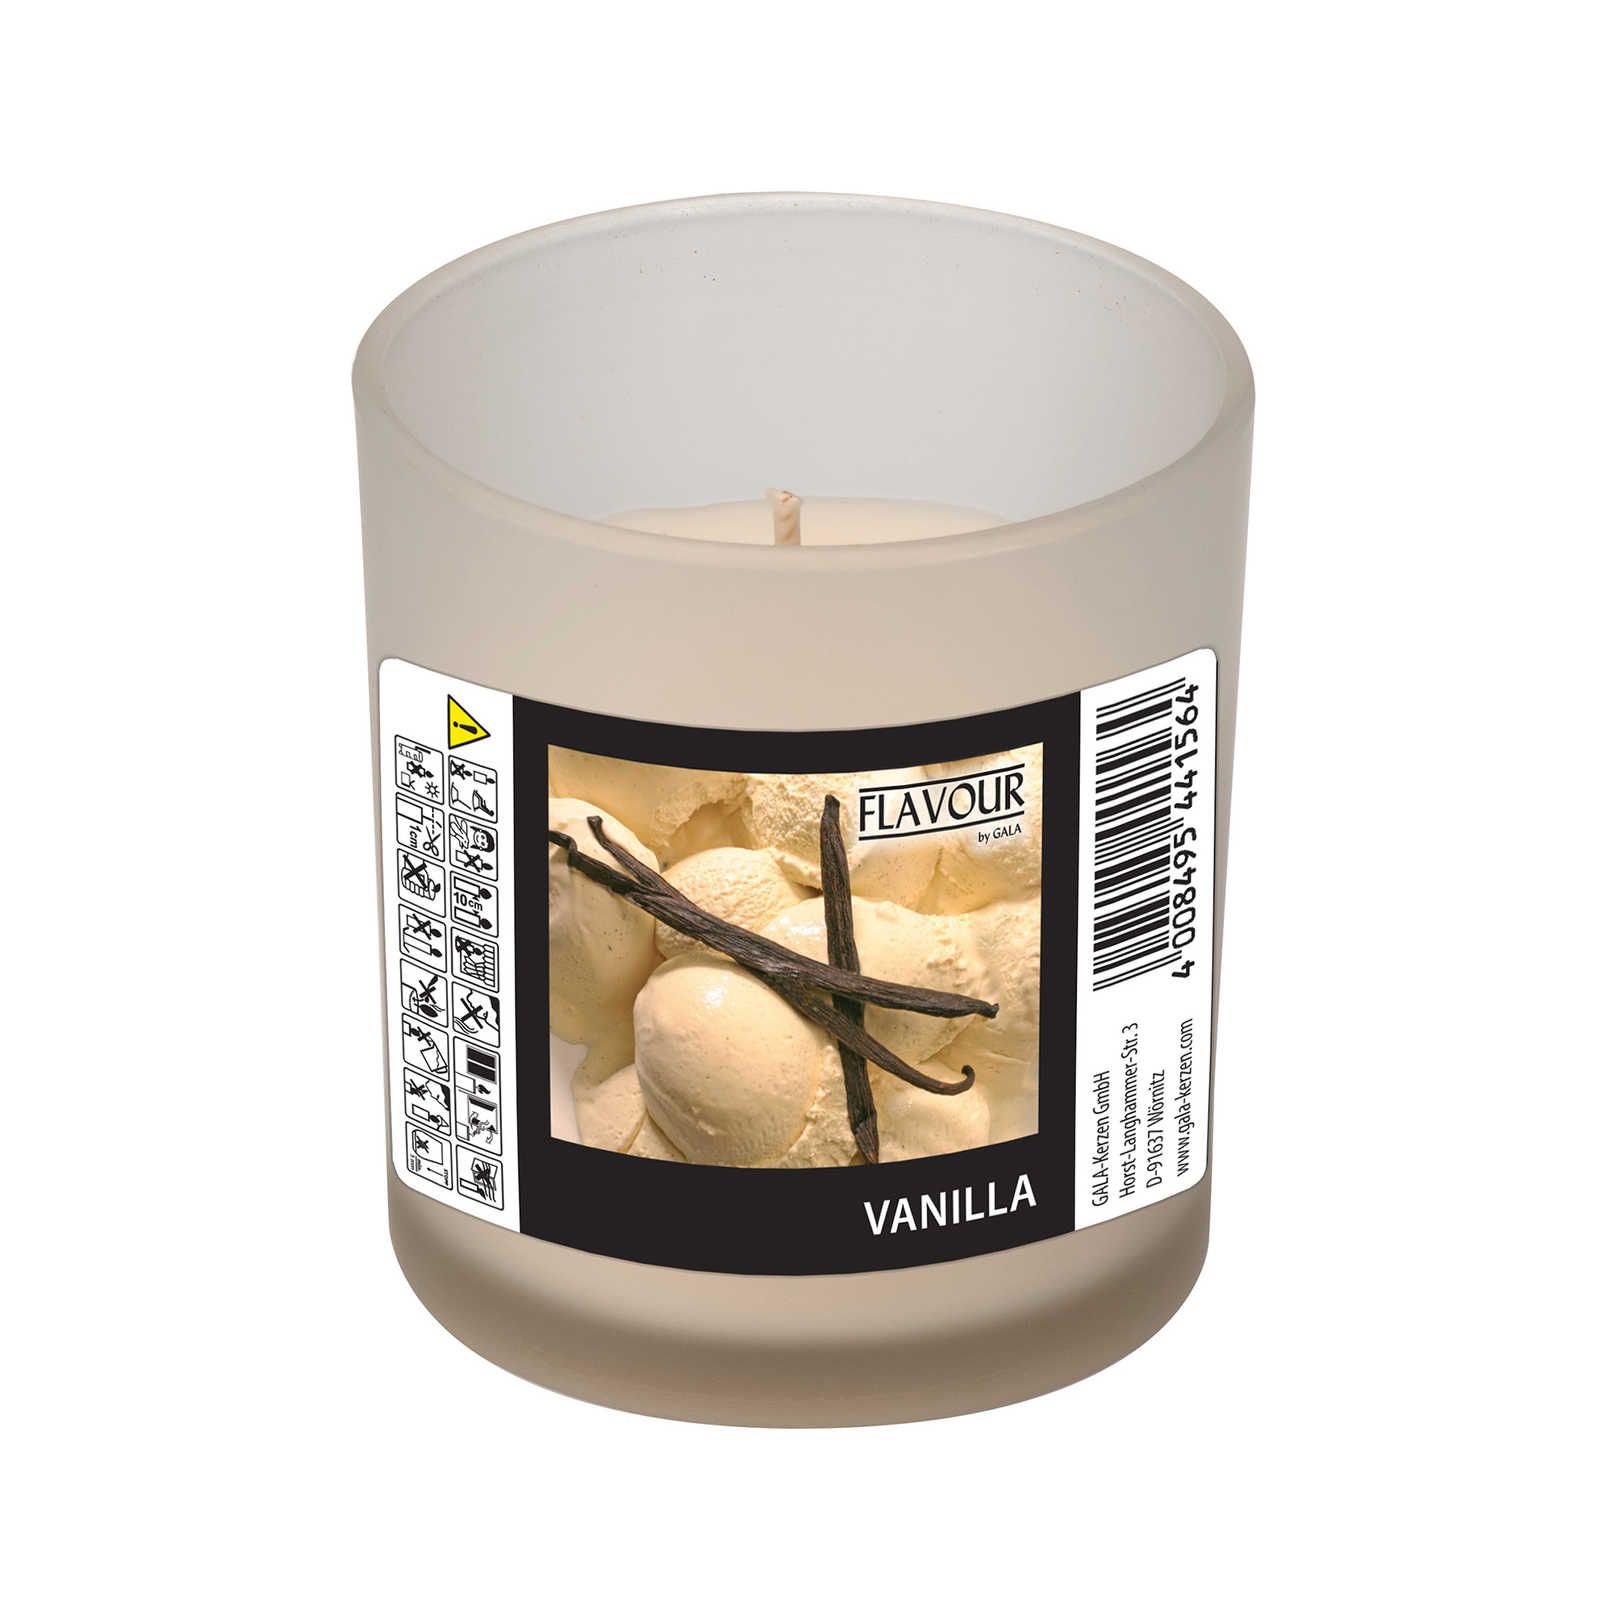             Vanilla scented candle with creamy vanilla scent - 110g
        